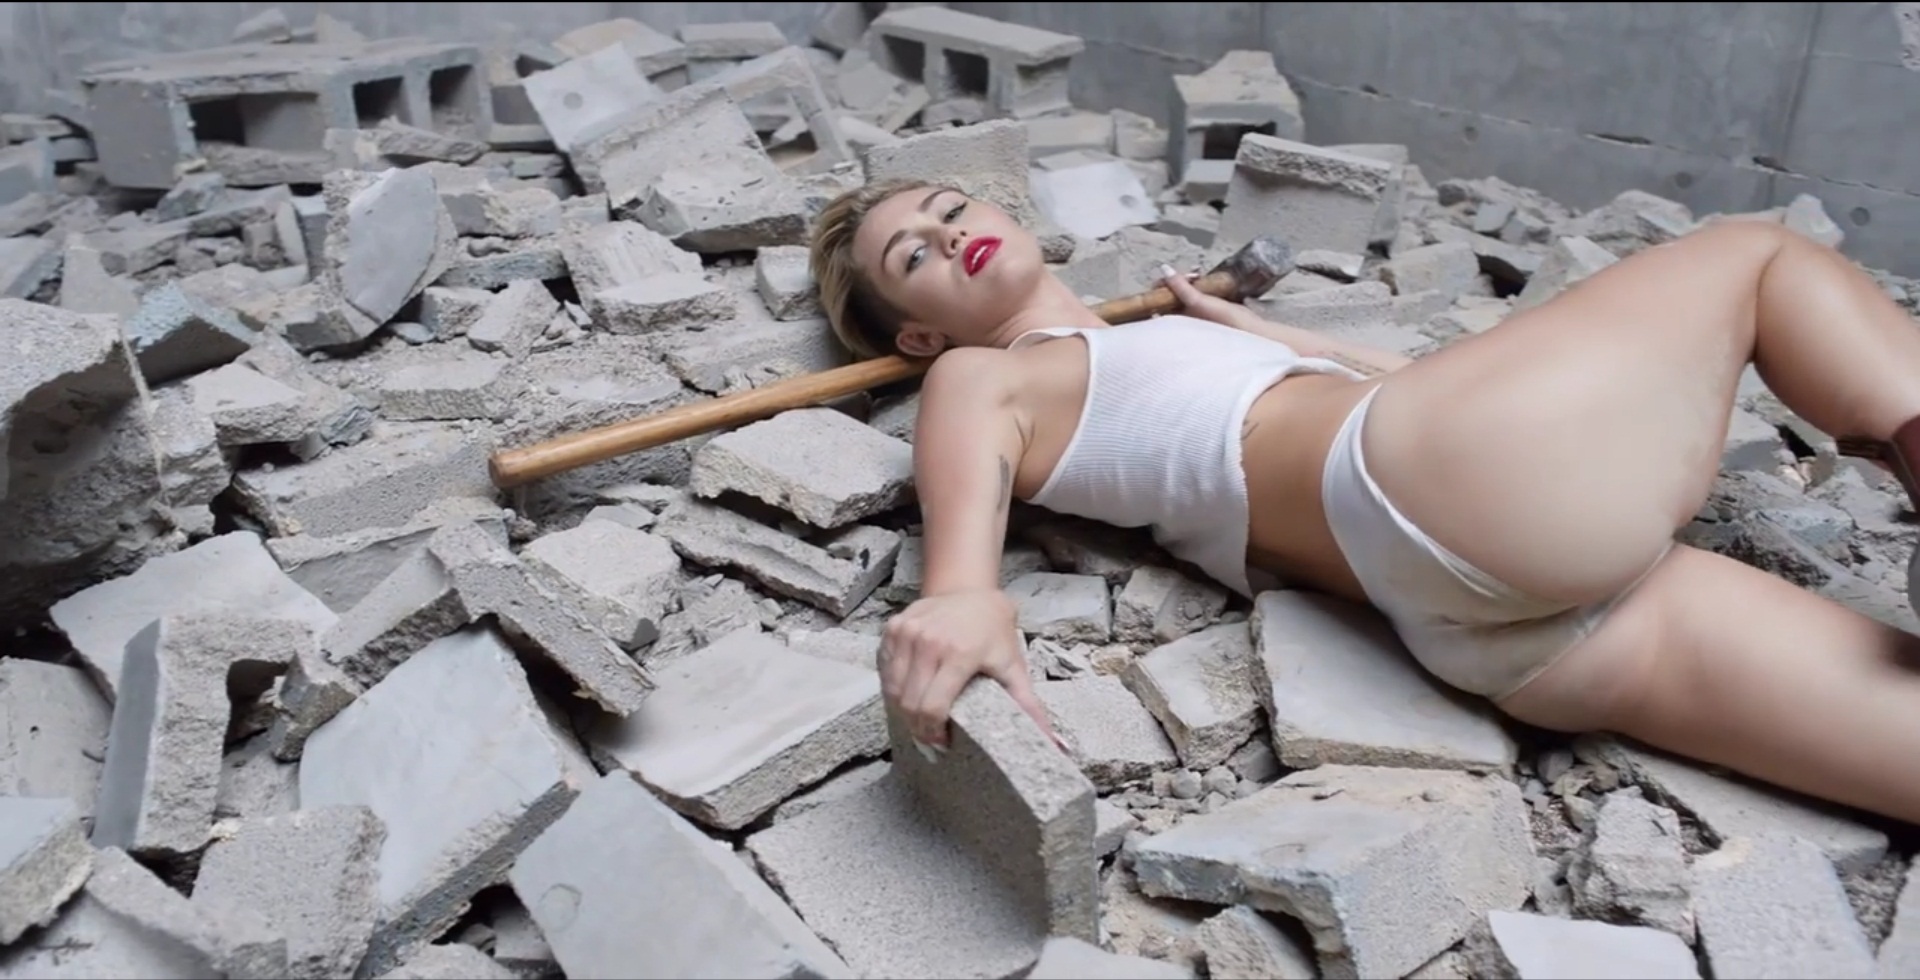 bonnie rollins add miley cyrus naked on wrecking ball photo